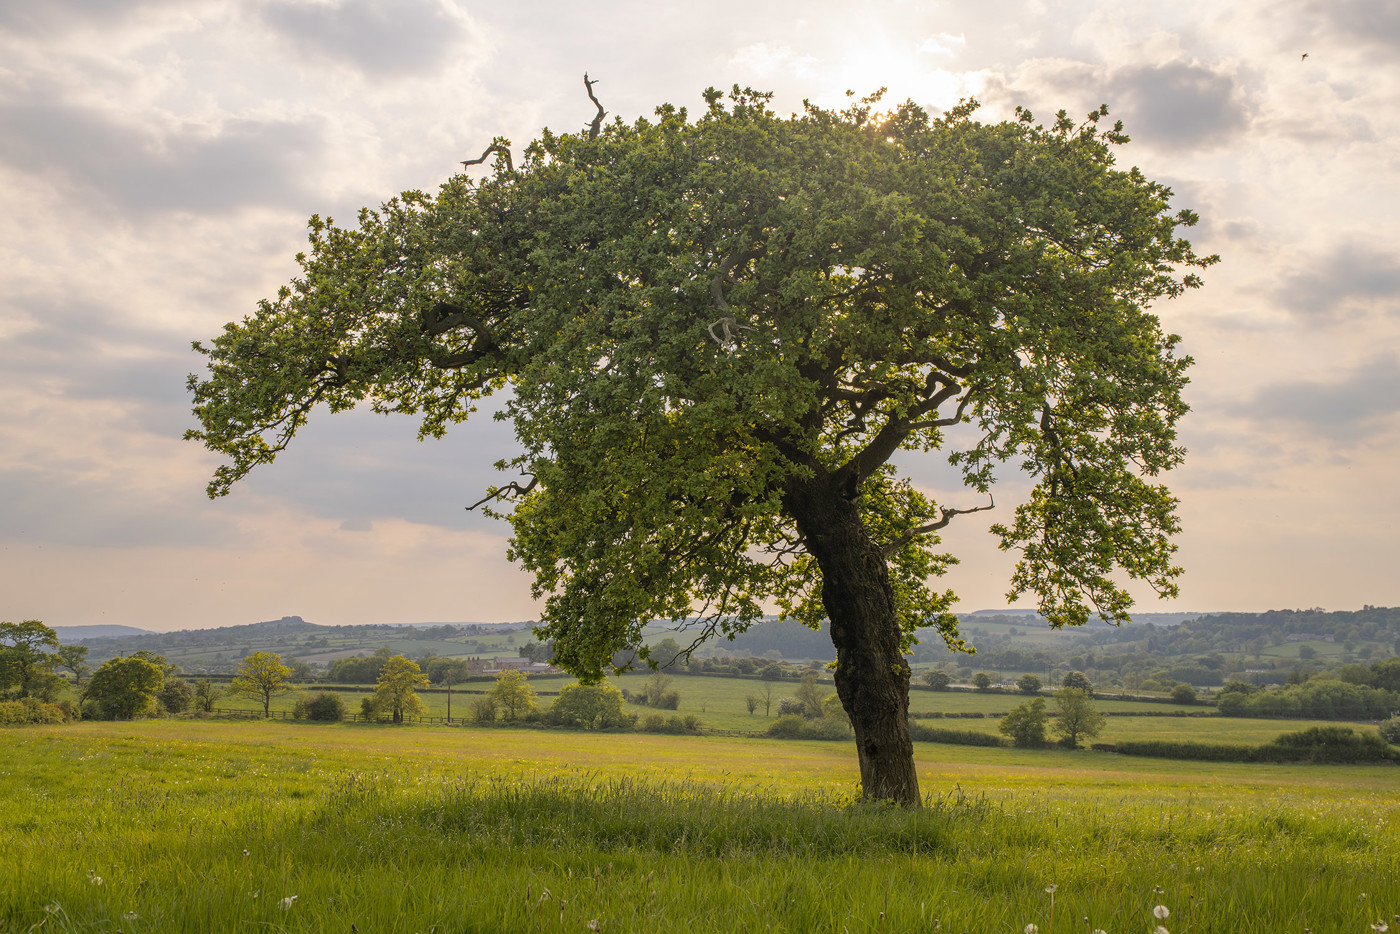  a large tree in a grassy field